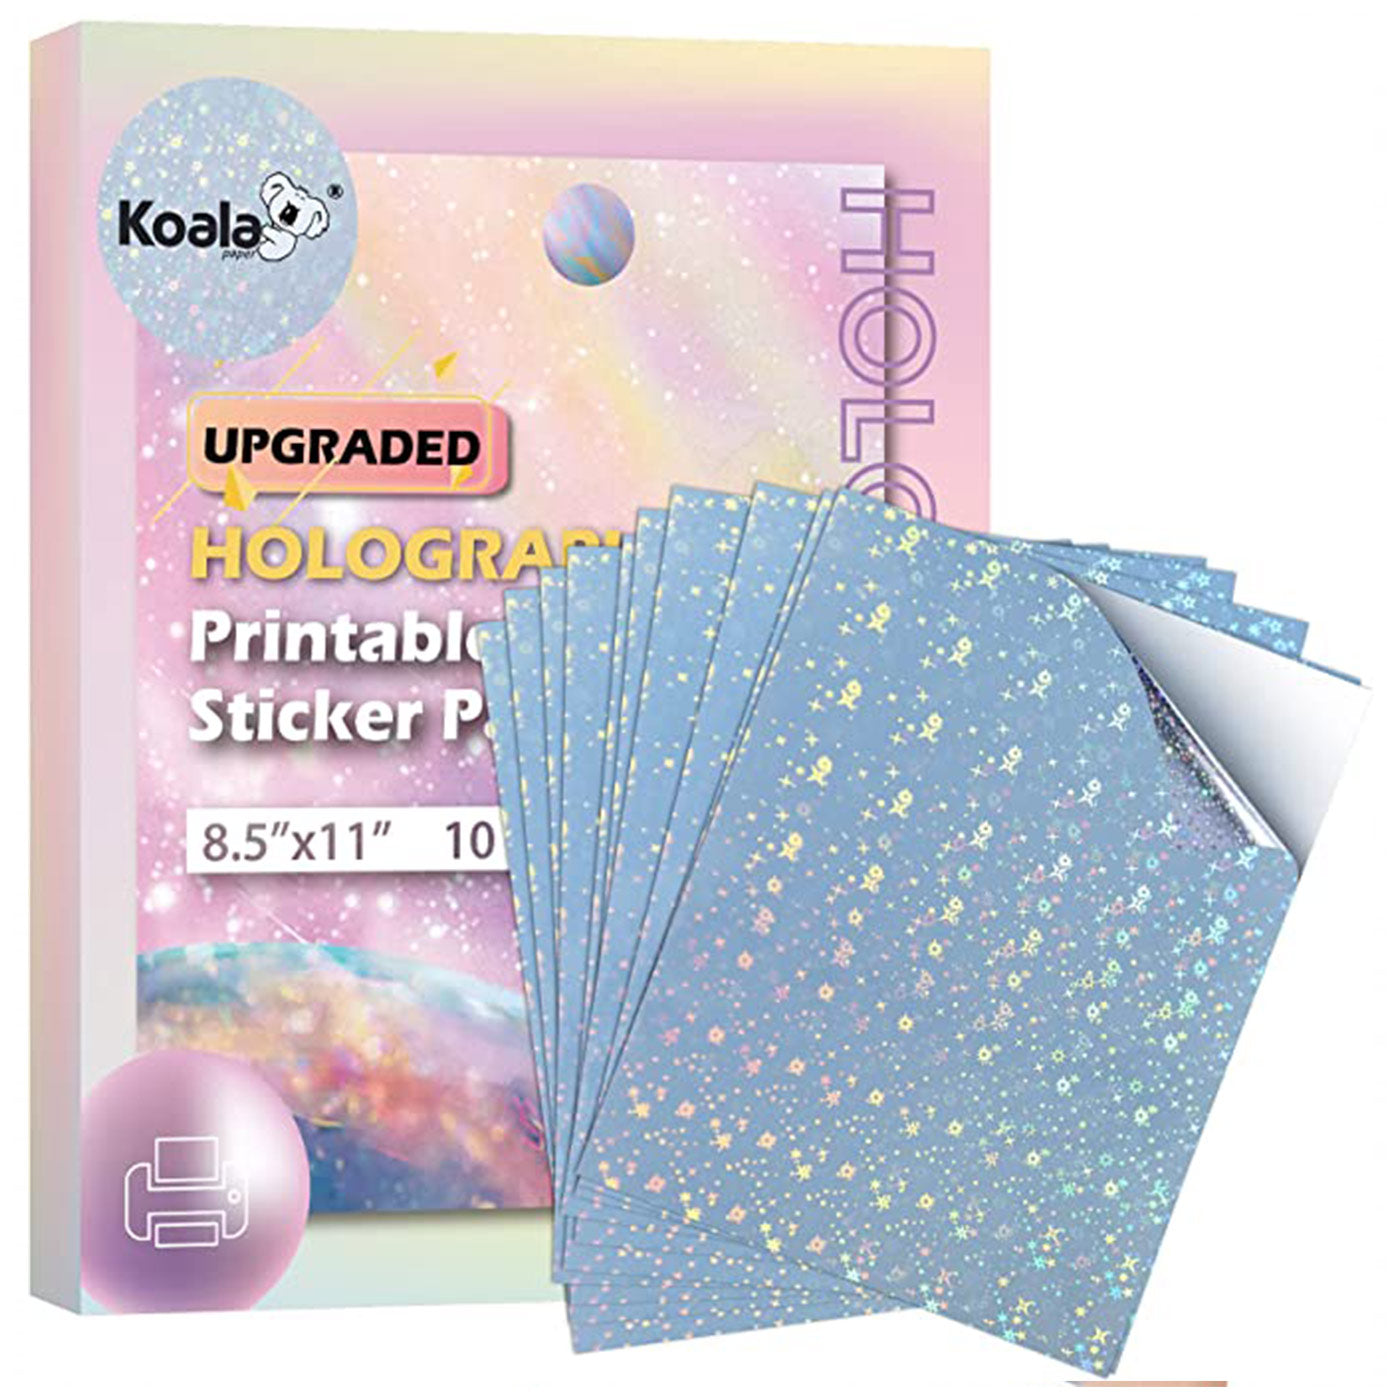  KOALA PAPER Printable Waterproof Paper for Inkjet Printer,  8.5x11 In 30 Sheets Matte White Vinyl Printer Paper, Non-Tearable, Durable,  Quick Drying : Office Products